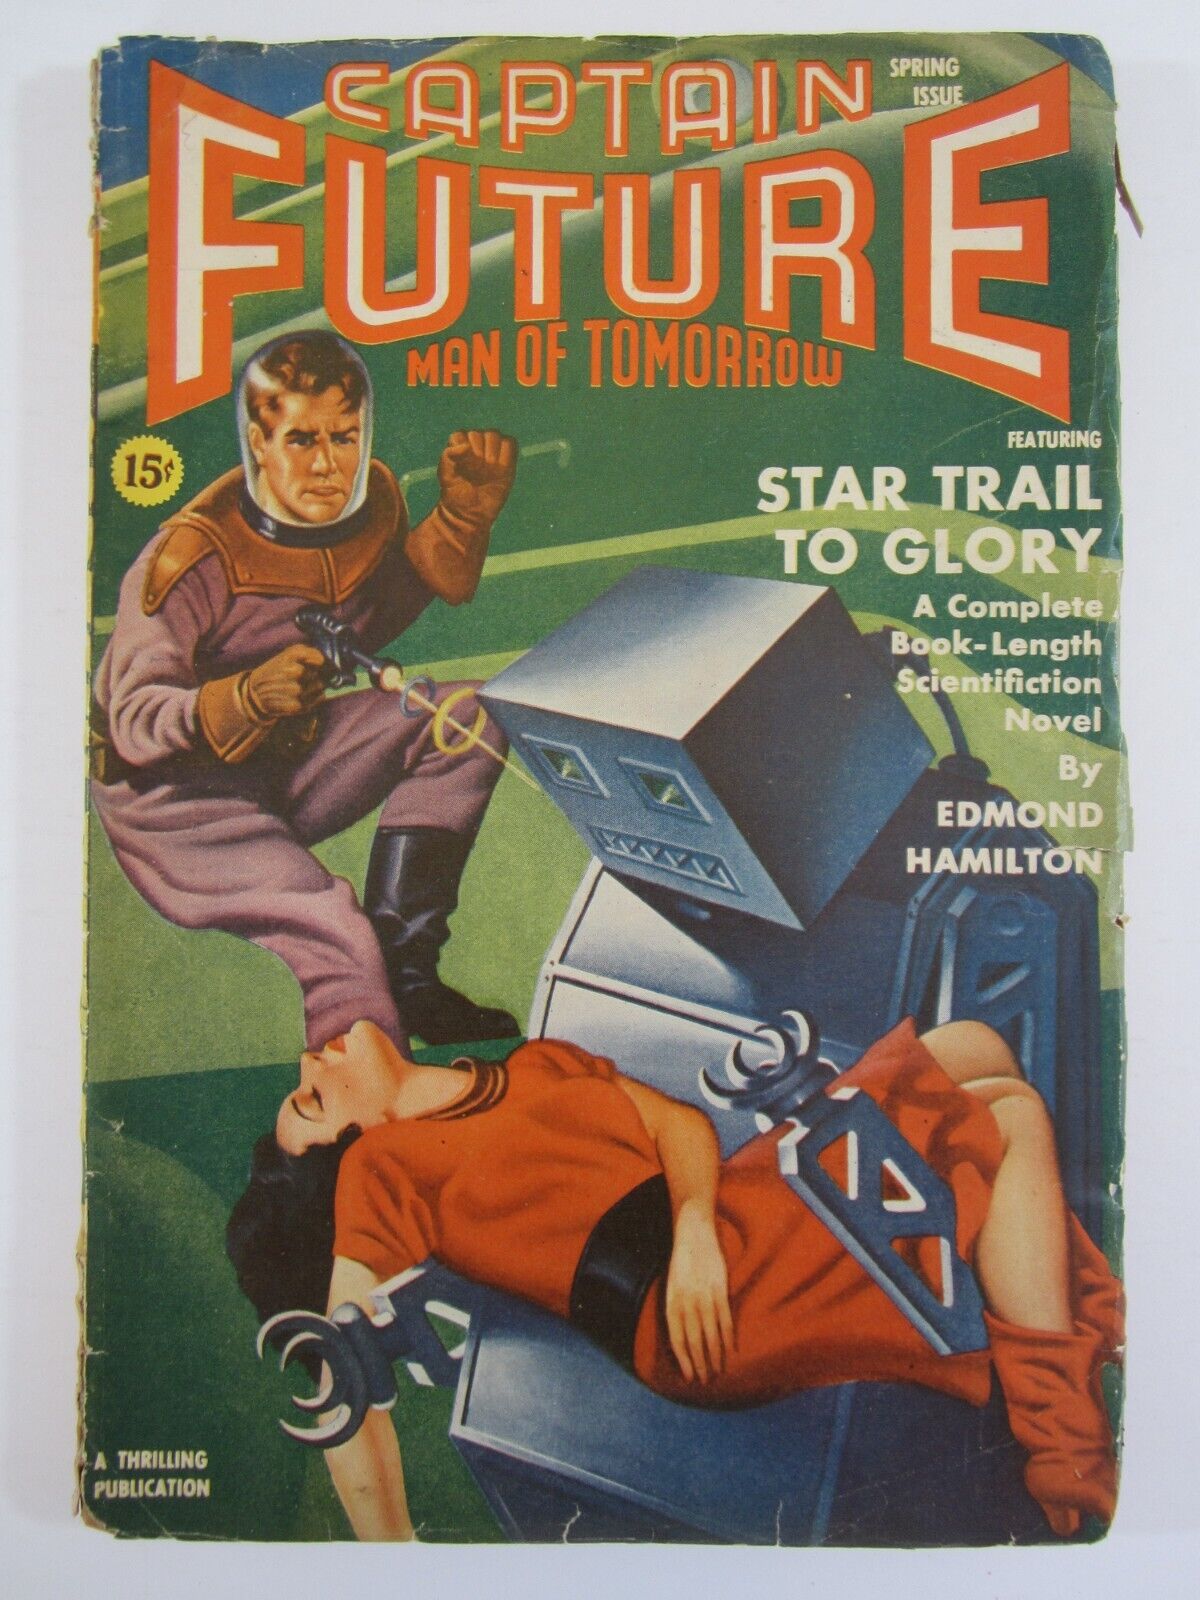 CAPTAIN FUTURE Vol. 2 #3, Spring 1941 VG+  Great Bergey Cover Art